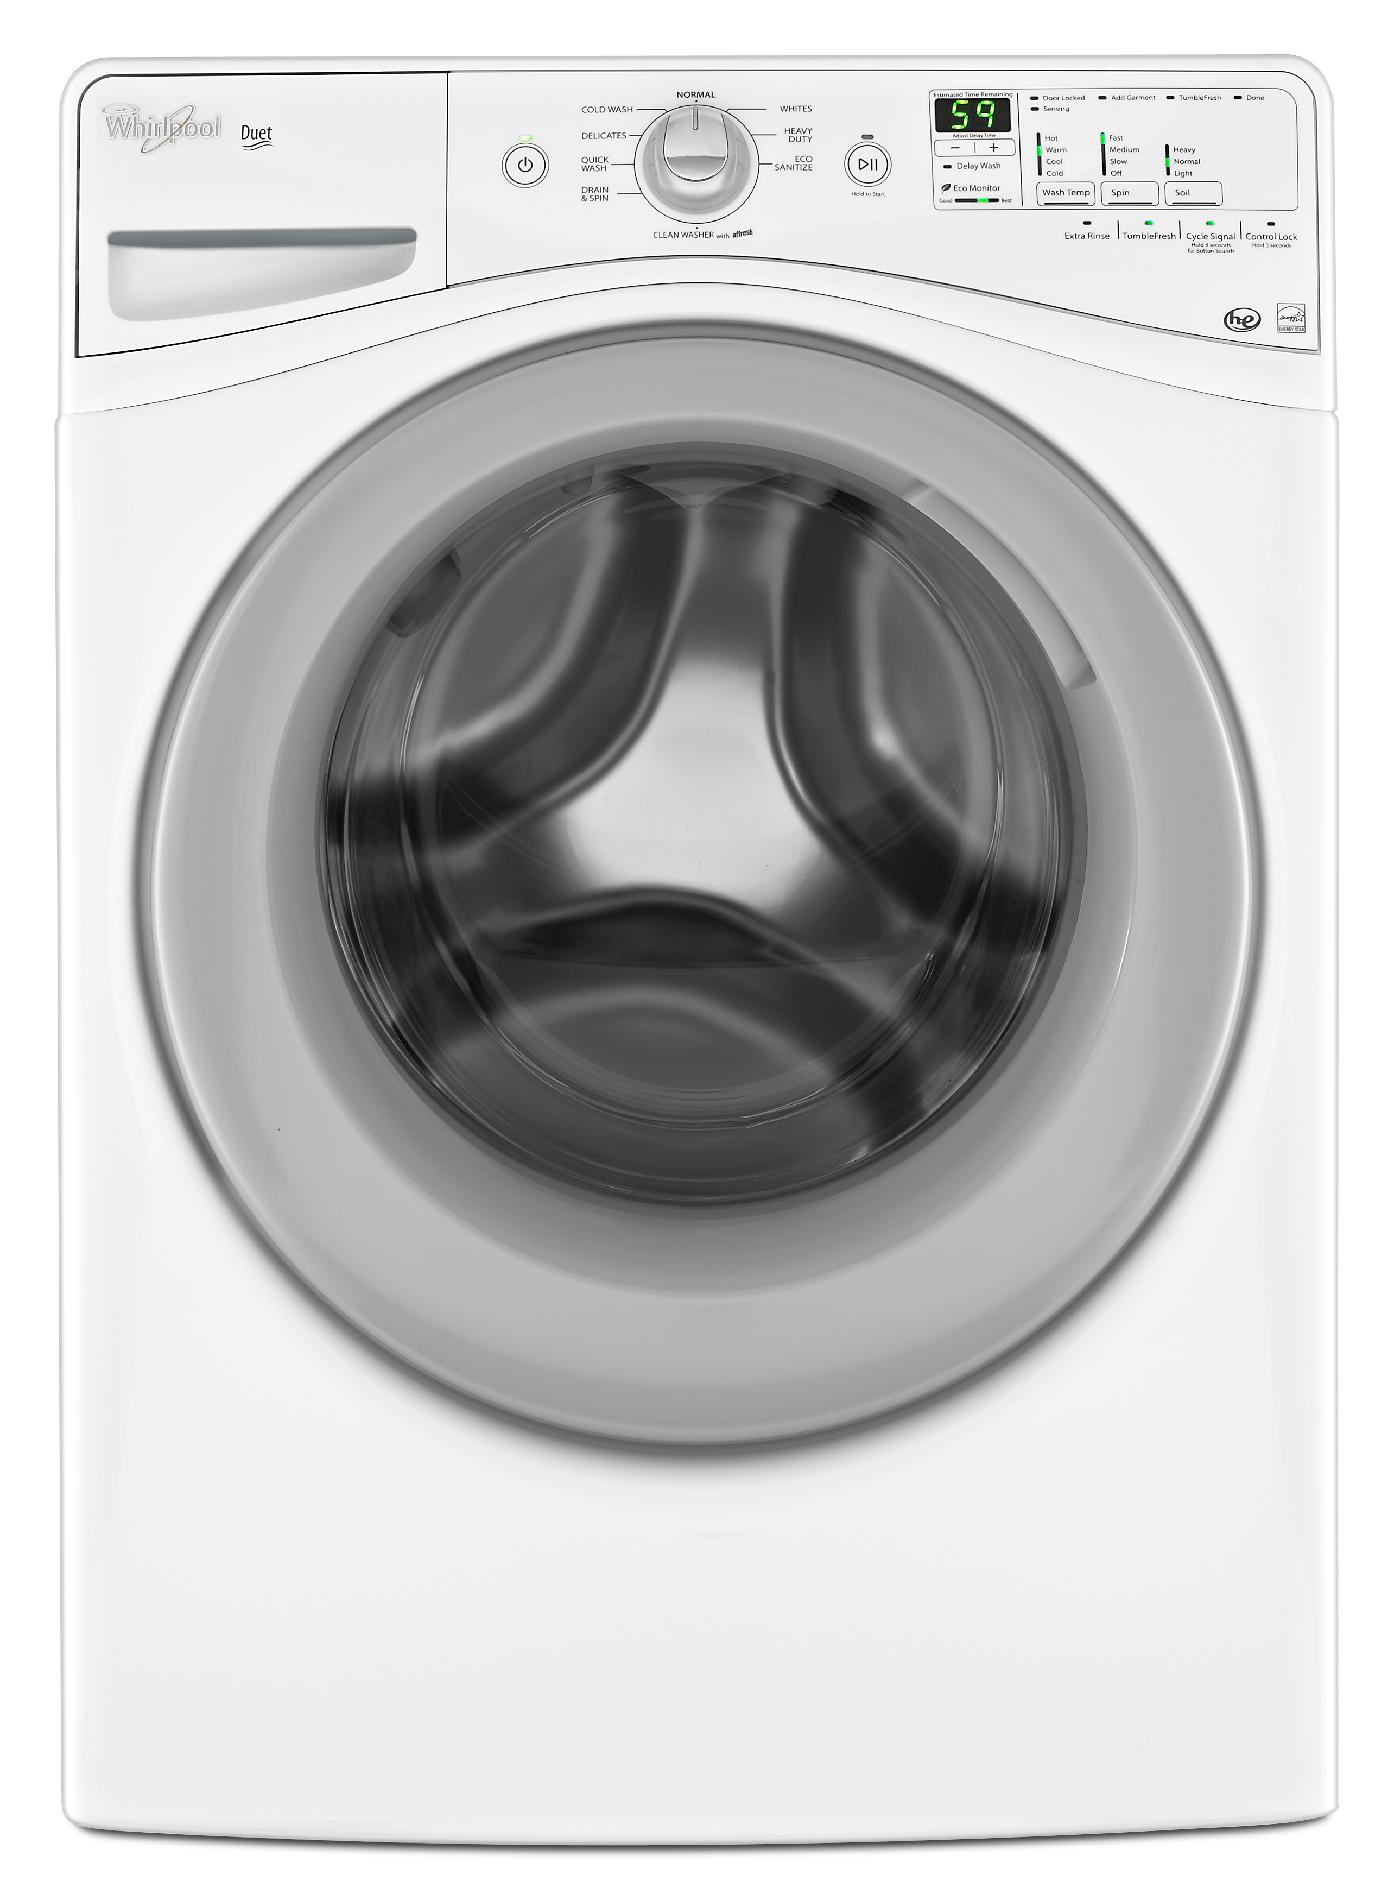 Whirlpool 4.1 cu. ft. Front-load Washer w/ TumbleFresh - White